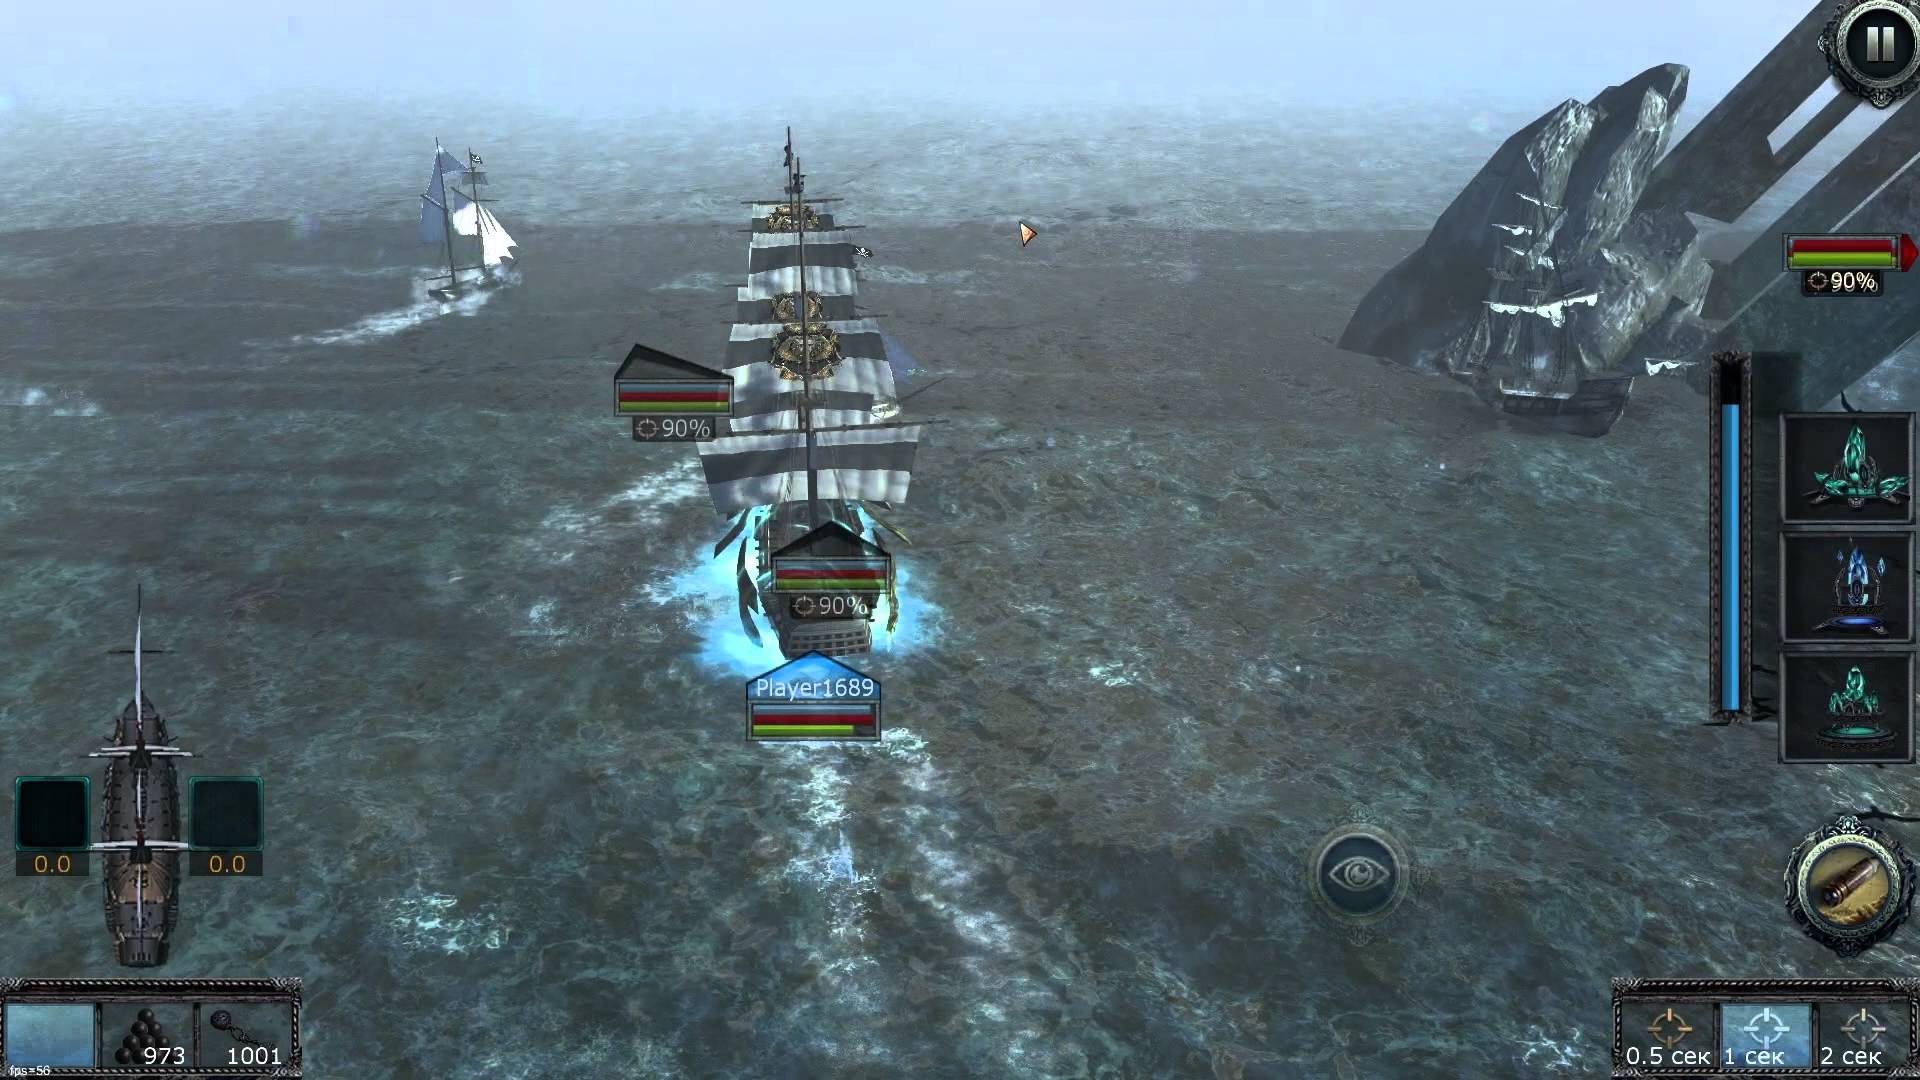 Tempest is Your Next Game of Pirate Ship Combat